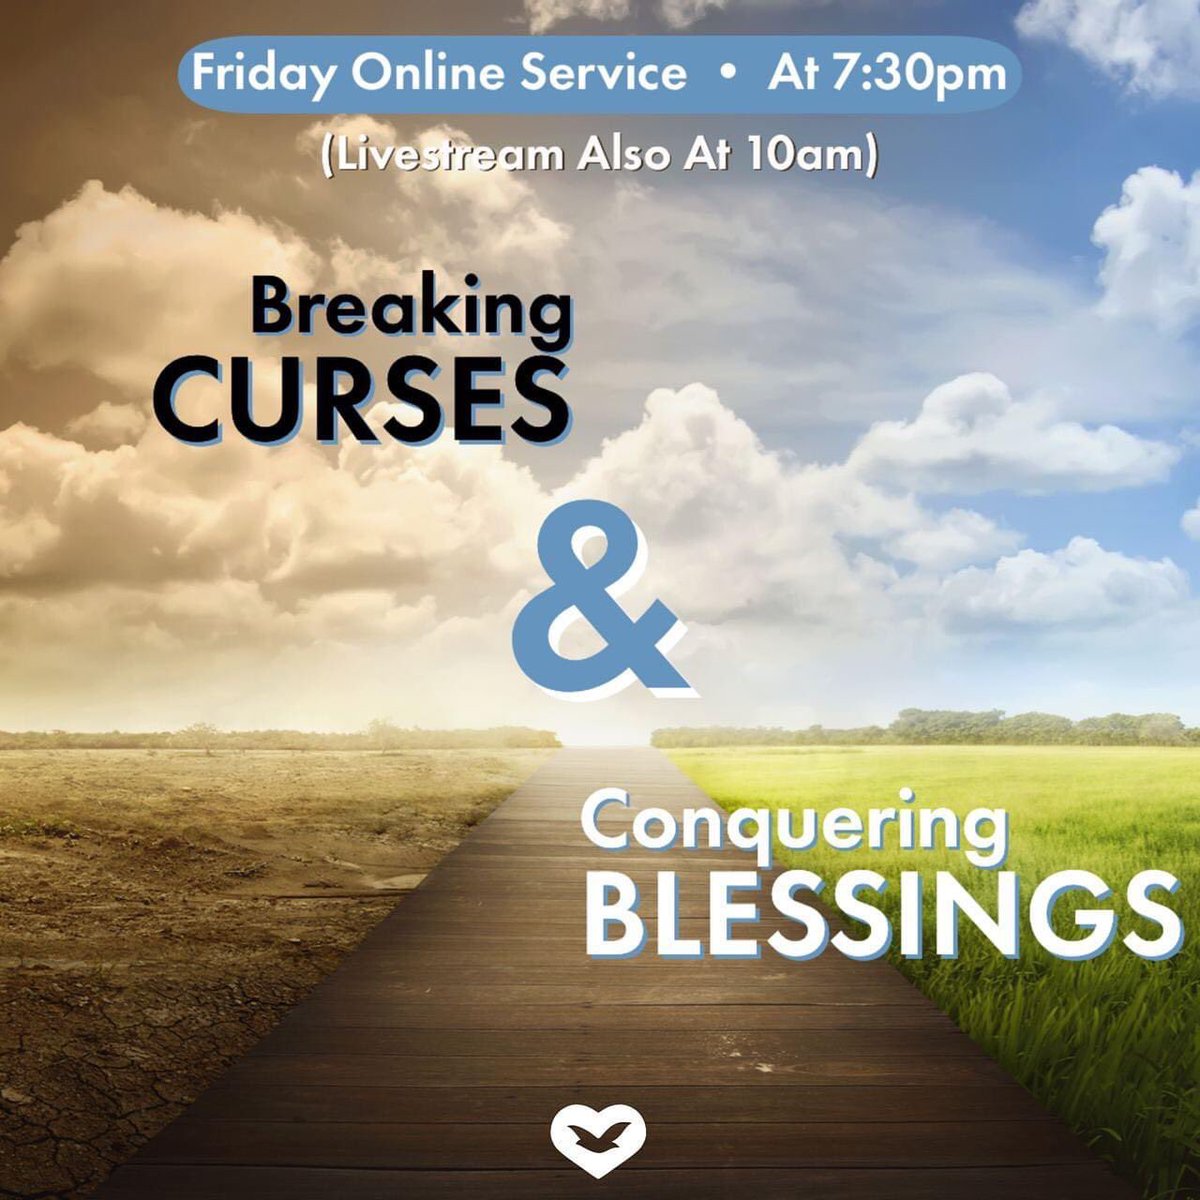 Are you tired of the same cycle of failures and problems?

Connect @ 7:30pm via Facebook and Youtube  @ Universal Church Ireland 

(Churches outside Dublin are open for presencial services) 

#BreakingCurses #Change #Transformation #Friday #ChainOfPrayer #Liberation #Blessings